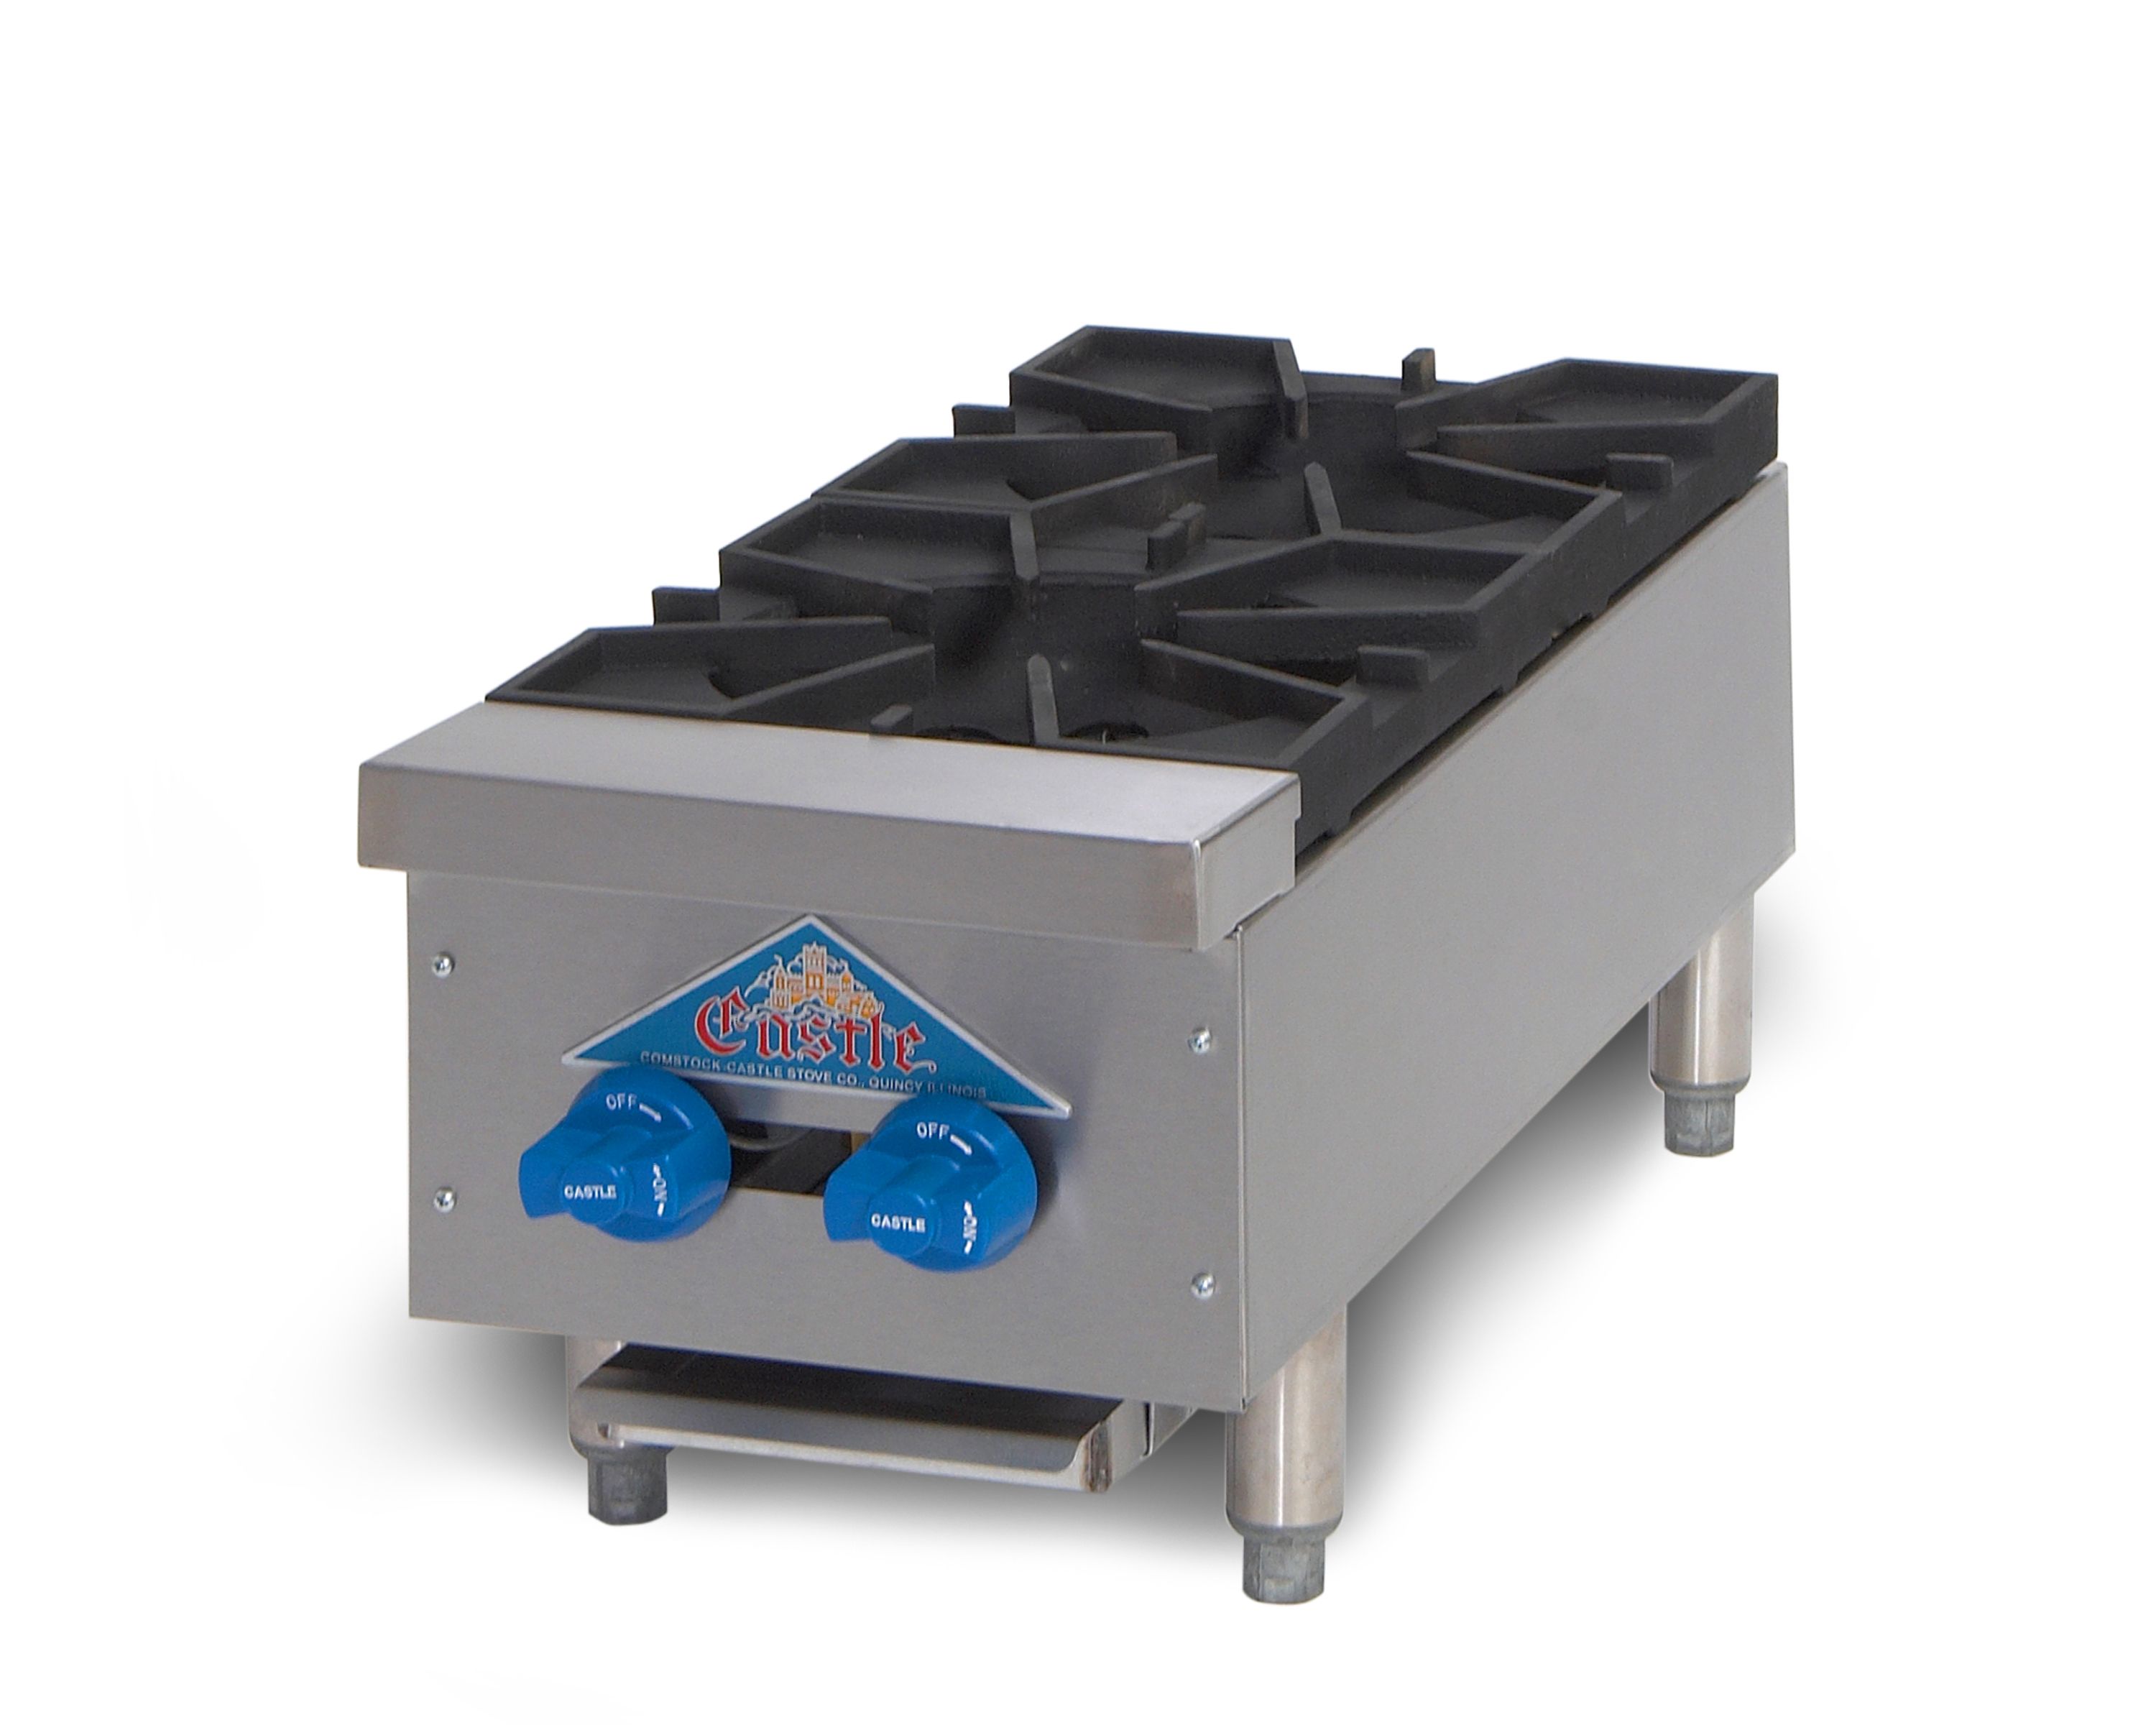 Heavy FHP Series Manual & Thermo Griddles - MADE IN USA